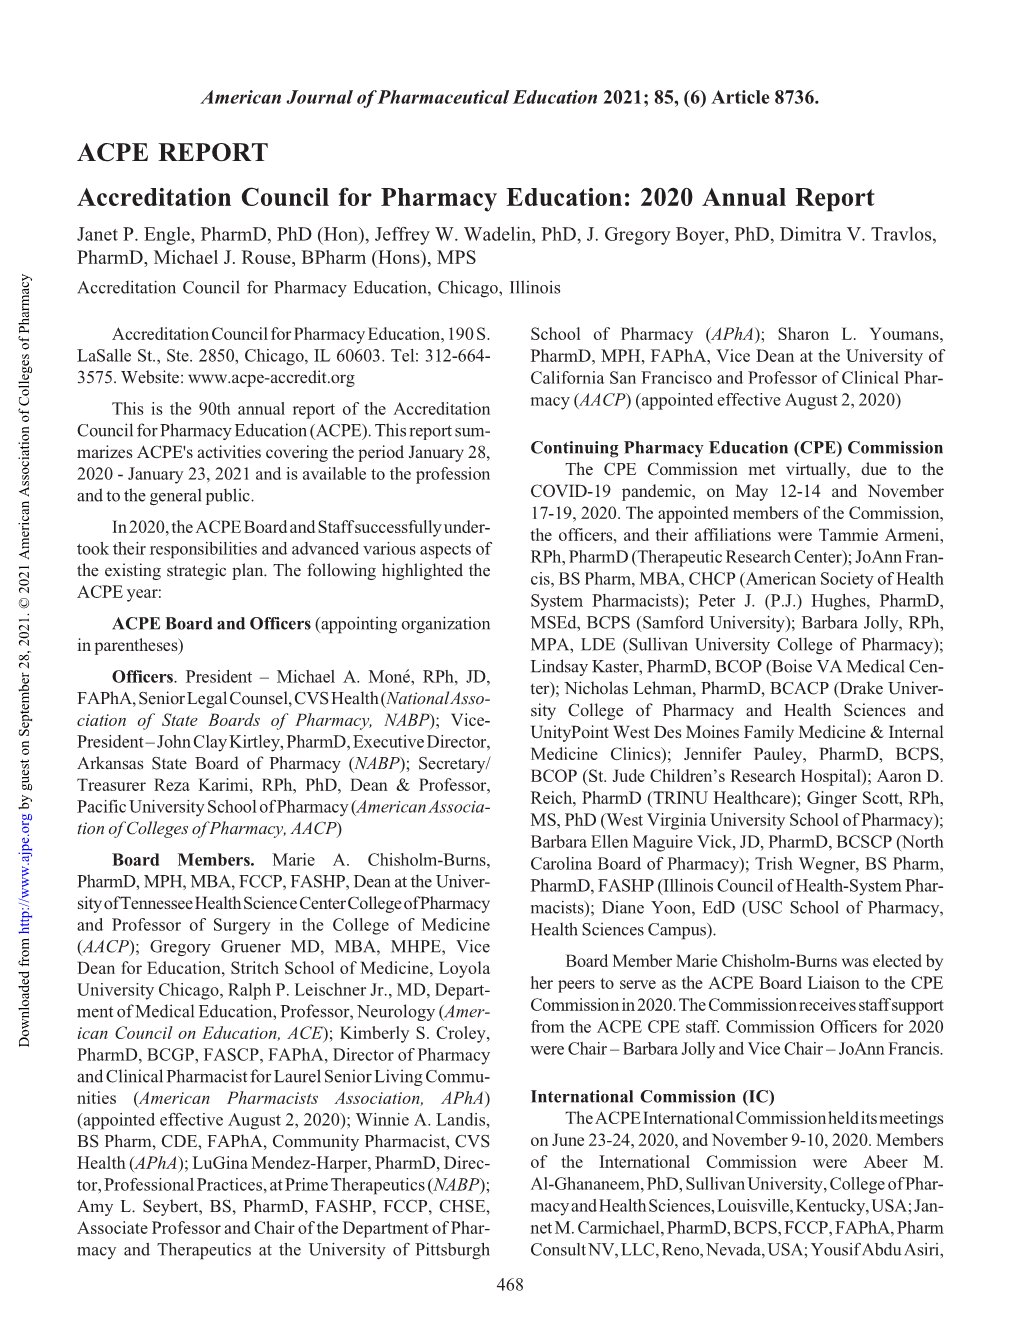 ACPE REPORT Accreditation Council for Pharmacy Education: 2020 Annual Report Janet P